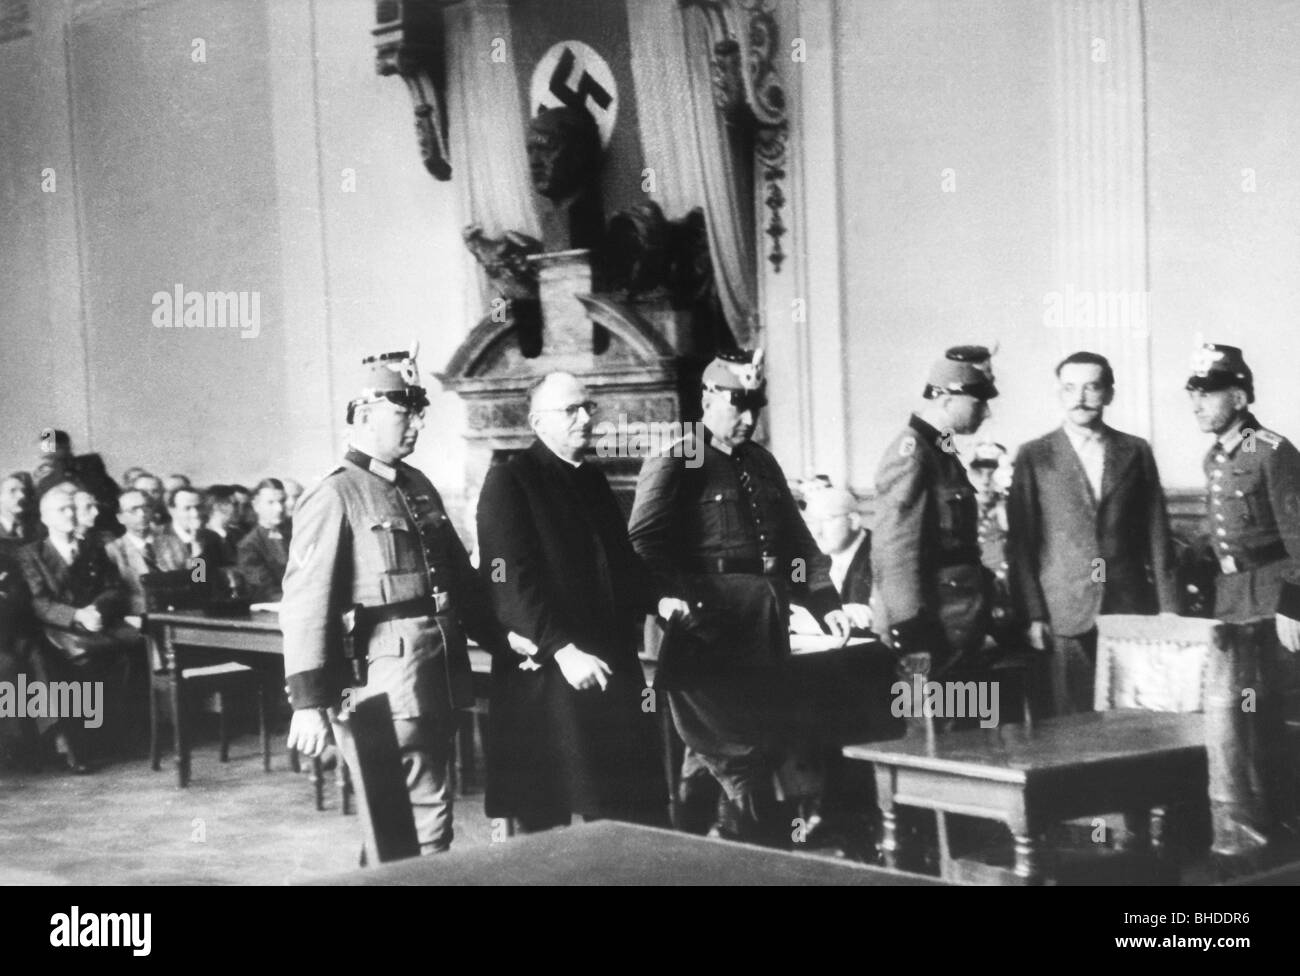 Wehrle, Hermann Josef, 26.7.1899 - 14.9.1944, German clergyman, half length, as witness at the People's Court during the trial against Ludwig von Leonrod, Berlin, 19.- 21.8.1944, Stock Photo